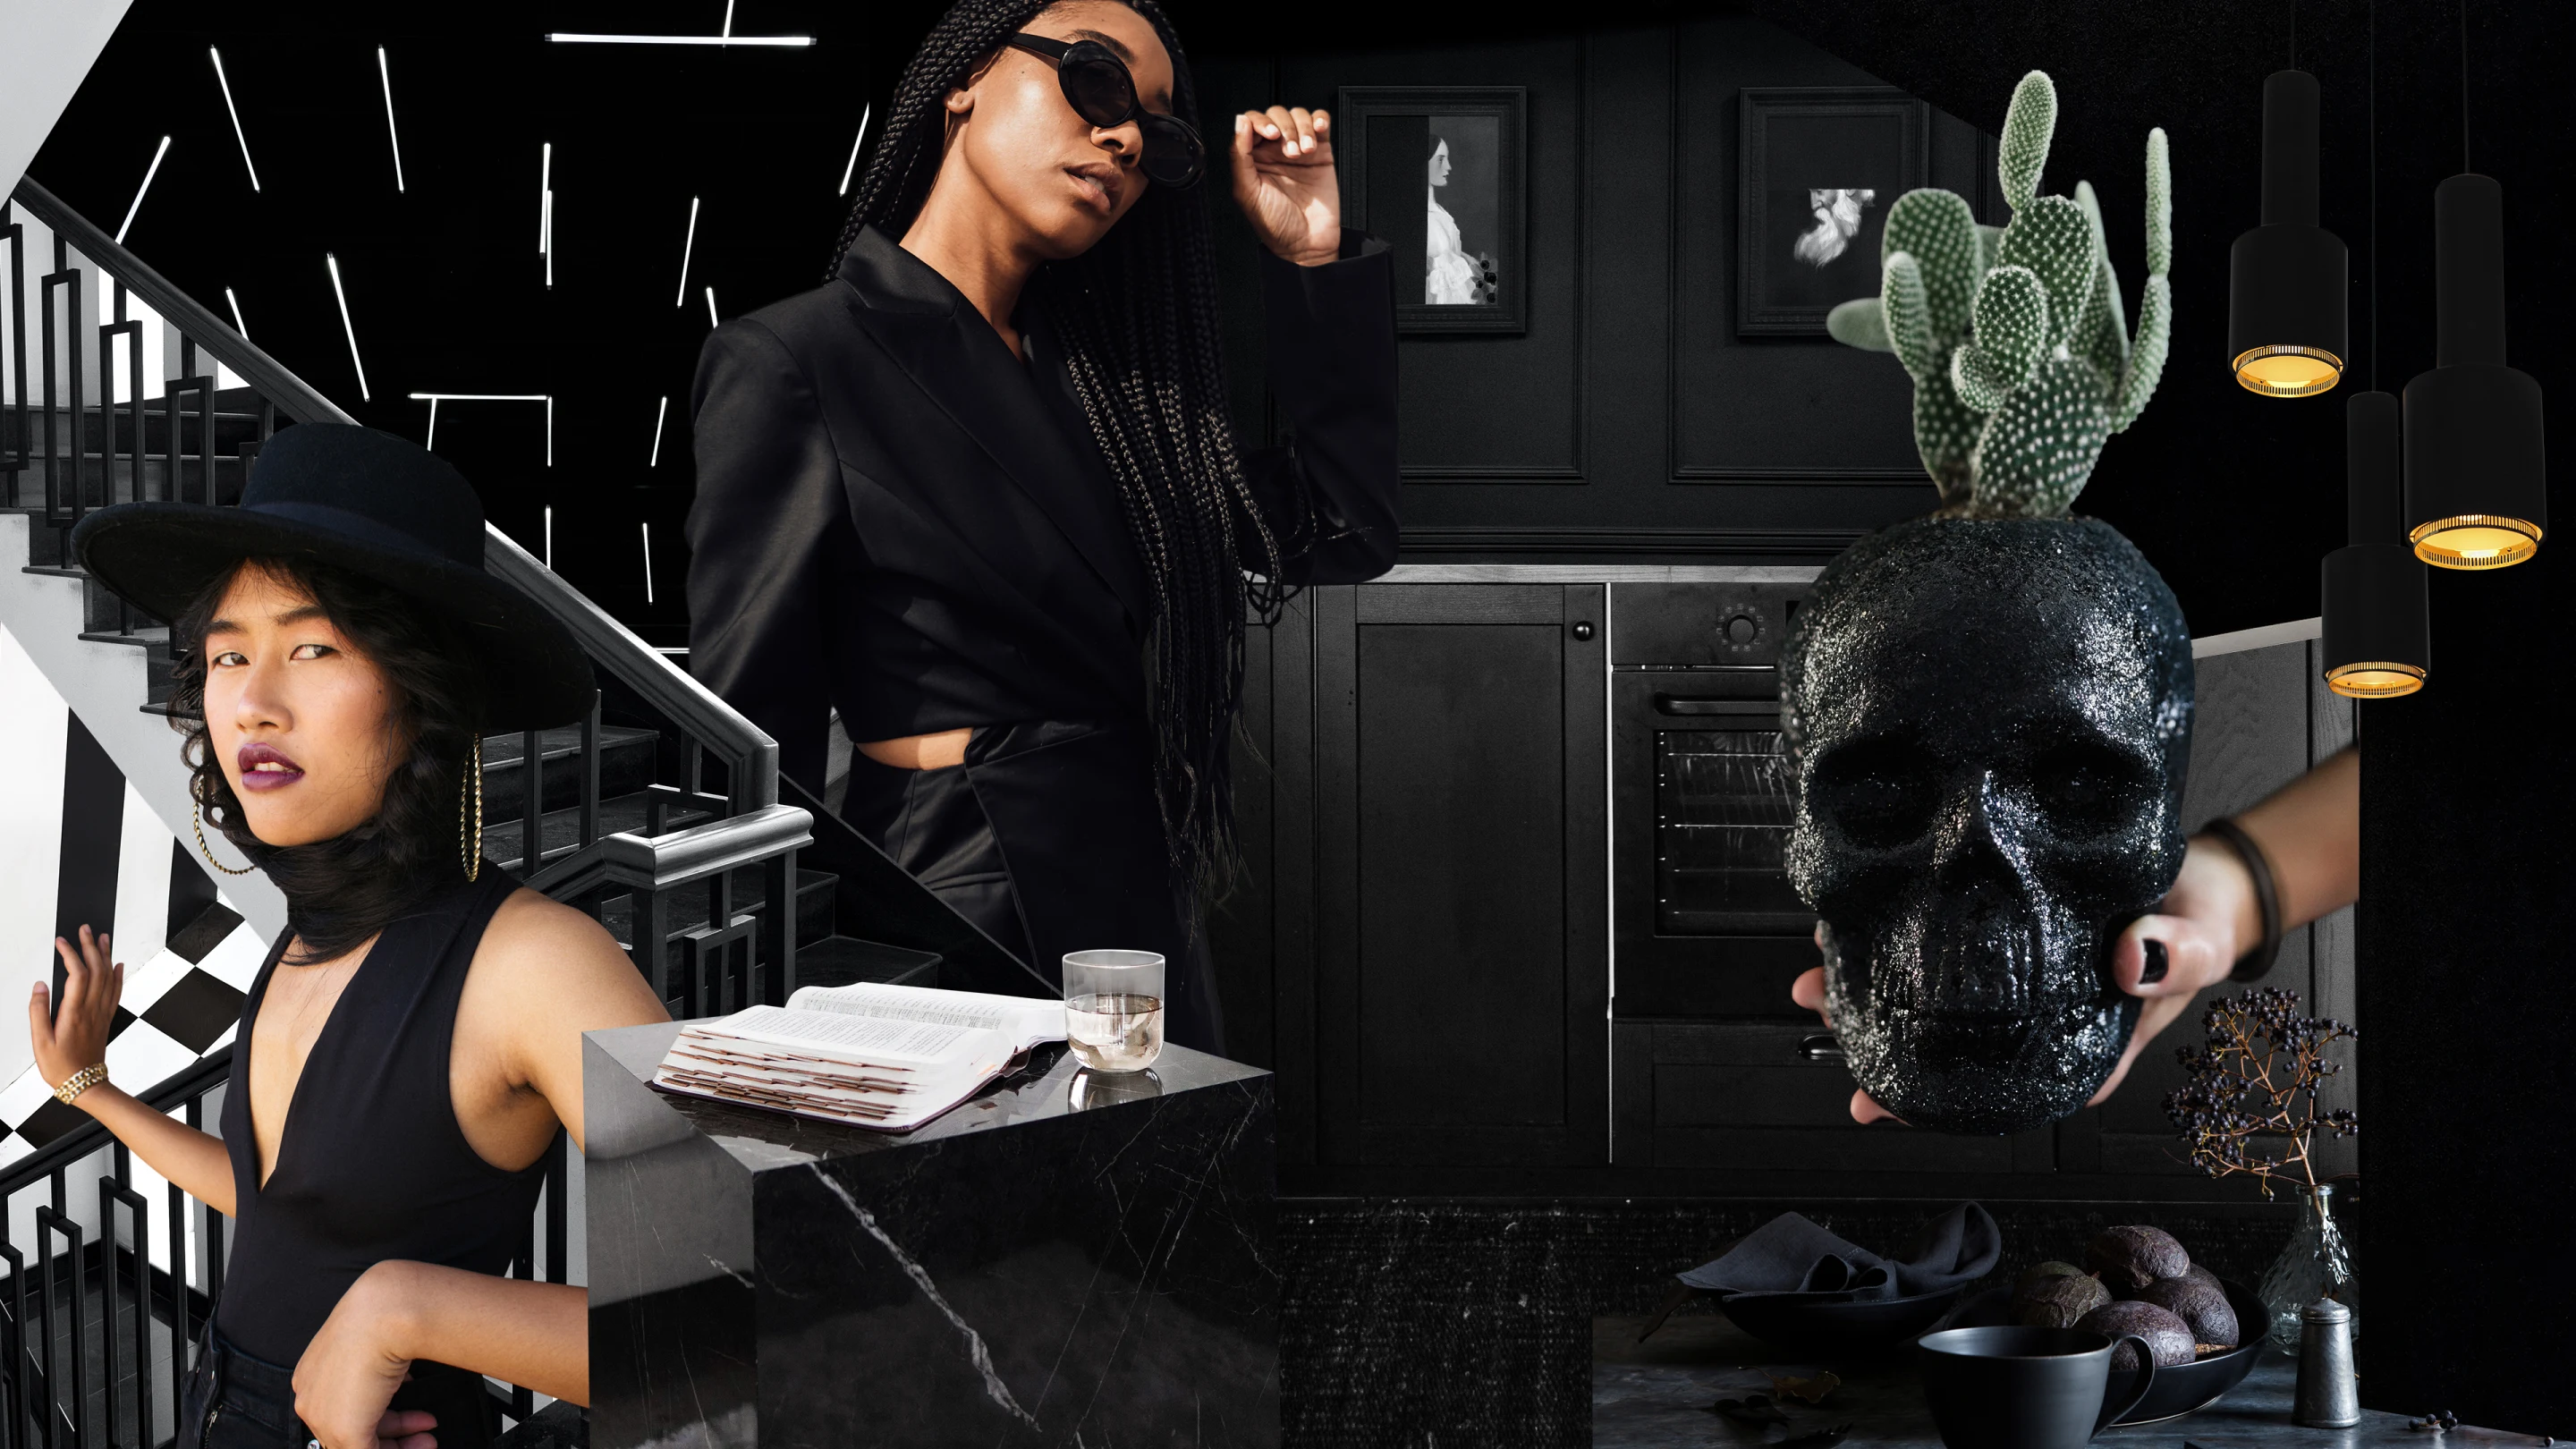 Collage of black items. Black and white staircase at left. Black marble cube with a book and glass of water on top. Black woman wearing black clothes and black glasses. A hand with black nail polish holding a back skull-shaped planter. East Asian in a black hat, dress and scarf. Hanging black lamps.
